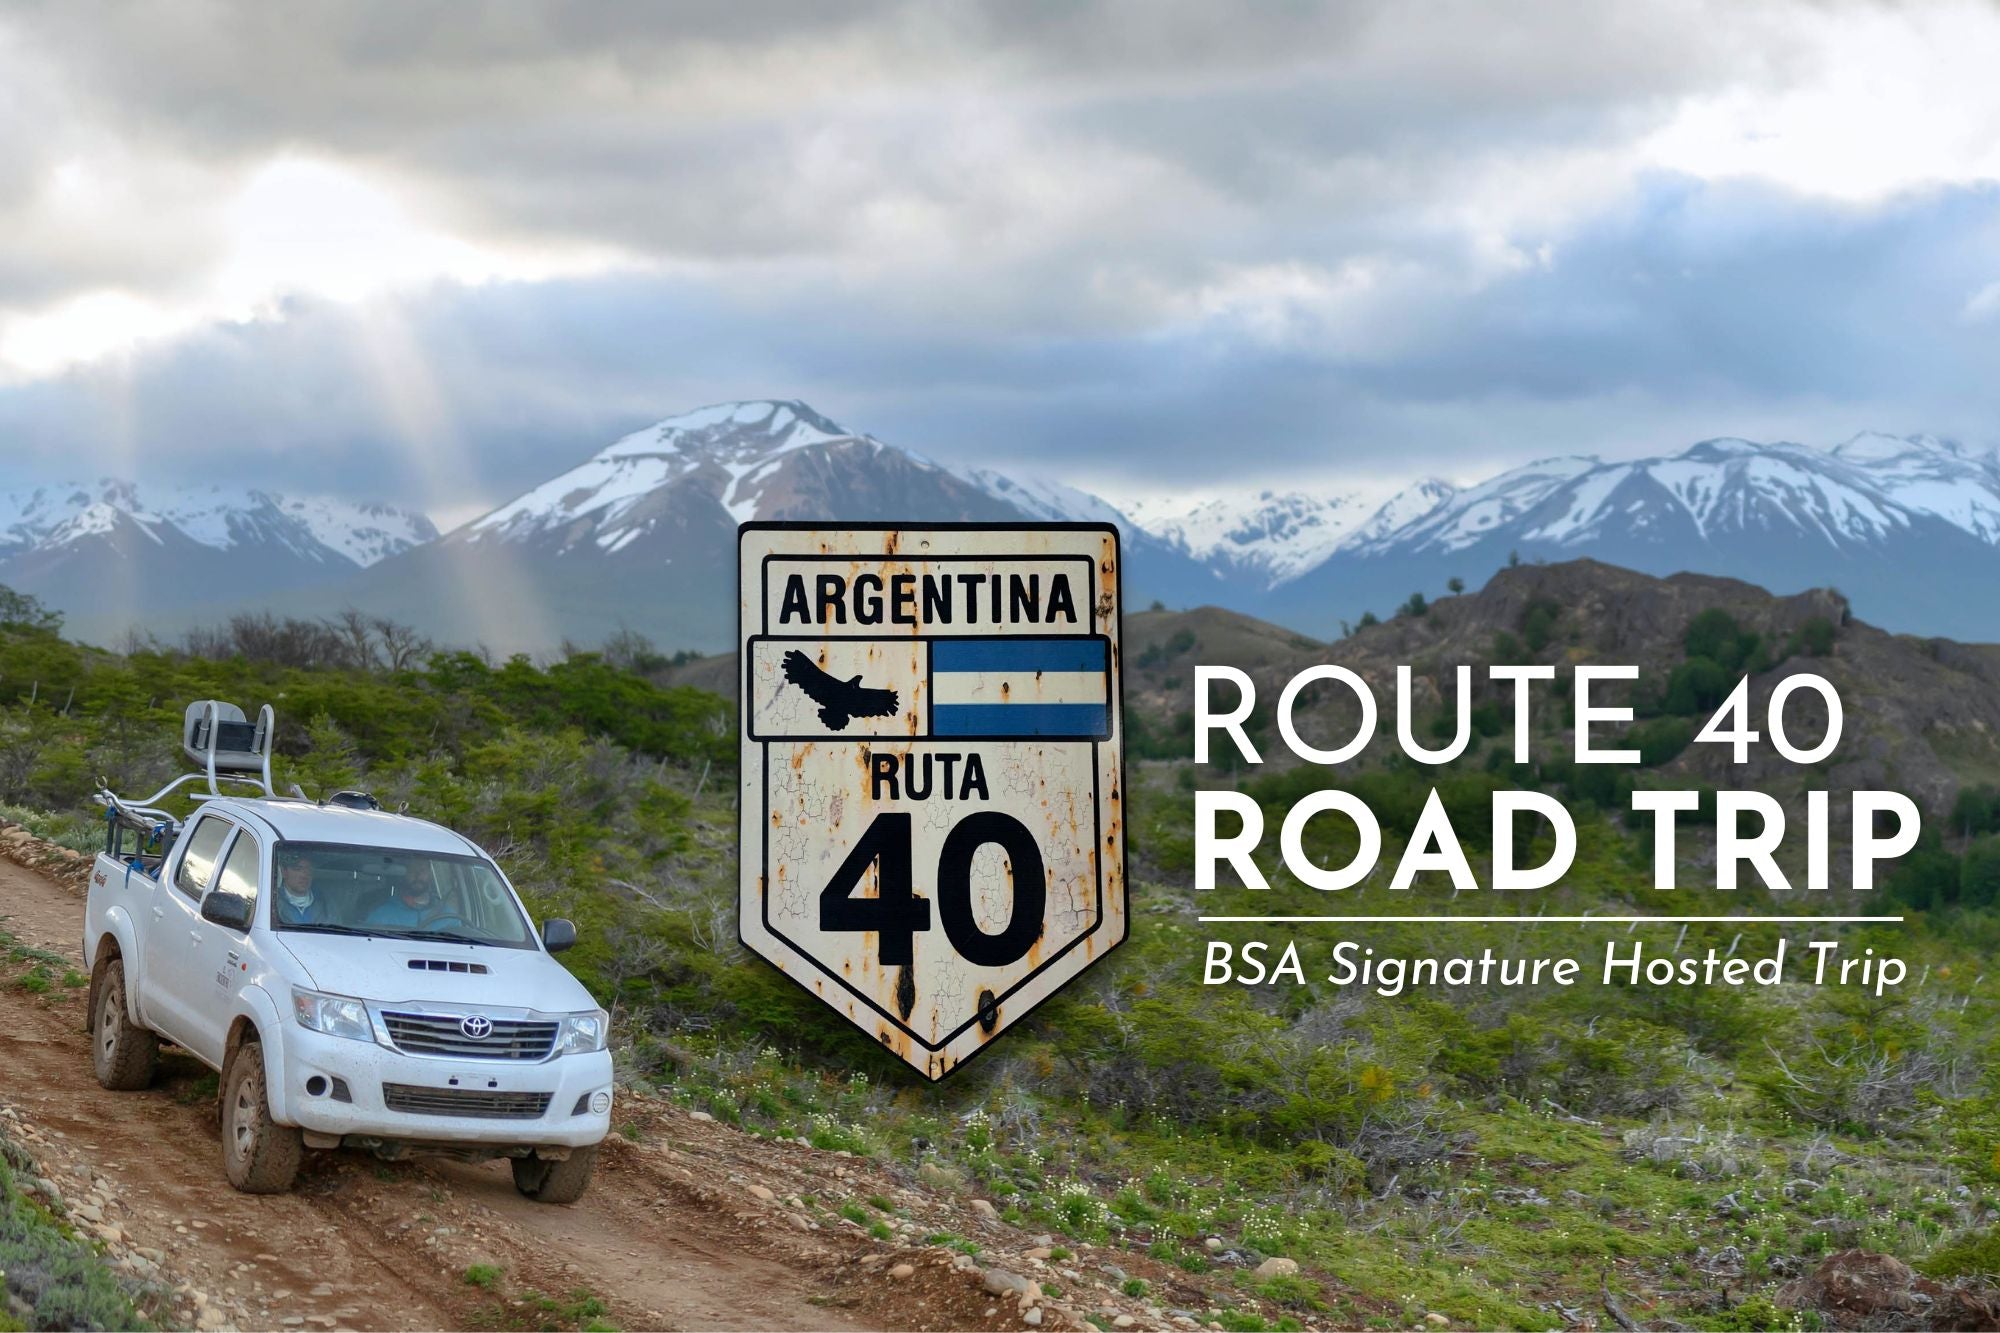 Hosted Trip Spotlight - Route 40 Road Trip, Argentina